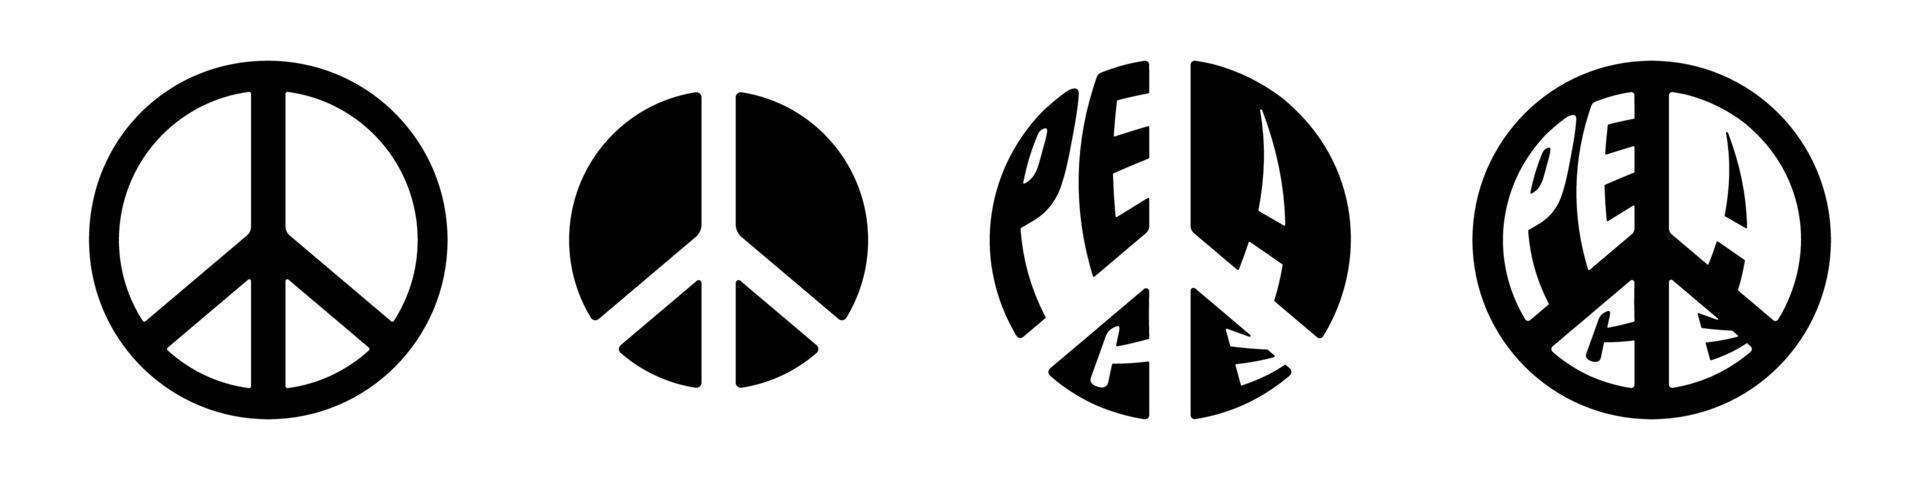 Peace sign set. No war different icons collection. Pacific international symbols. Antiwar movement of world disarmament black icons. Vector isolated eps illustation